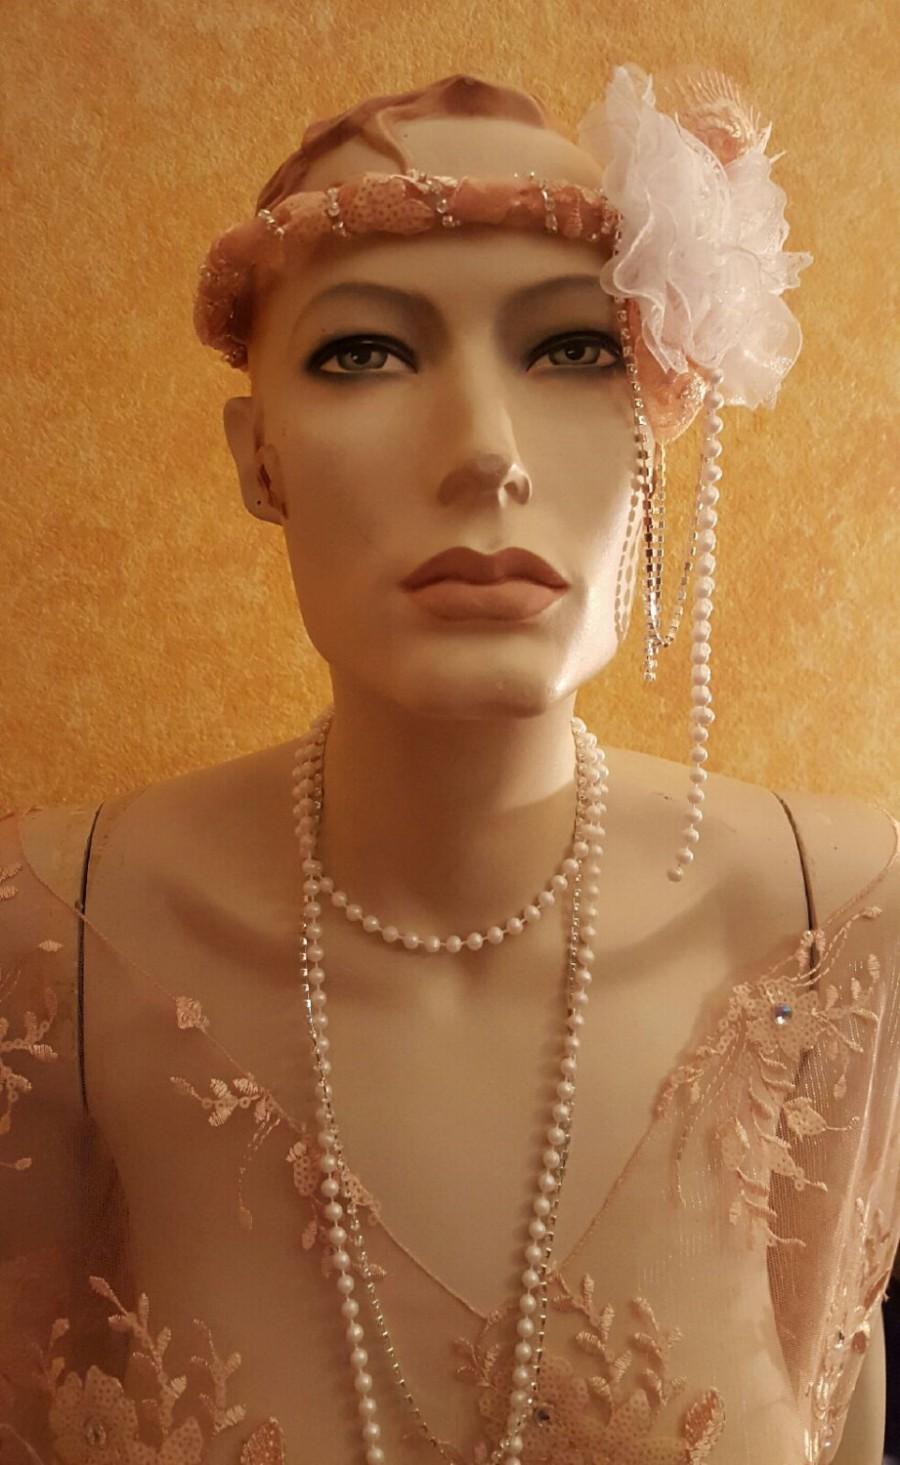 Wedding - Blush Peach & White Embroidered Lace Pearl Crystal Sequin Flapper Gatsby 20's Style Headpiece Headband Bridal Wedding Party Costume